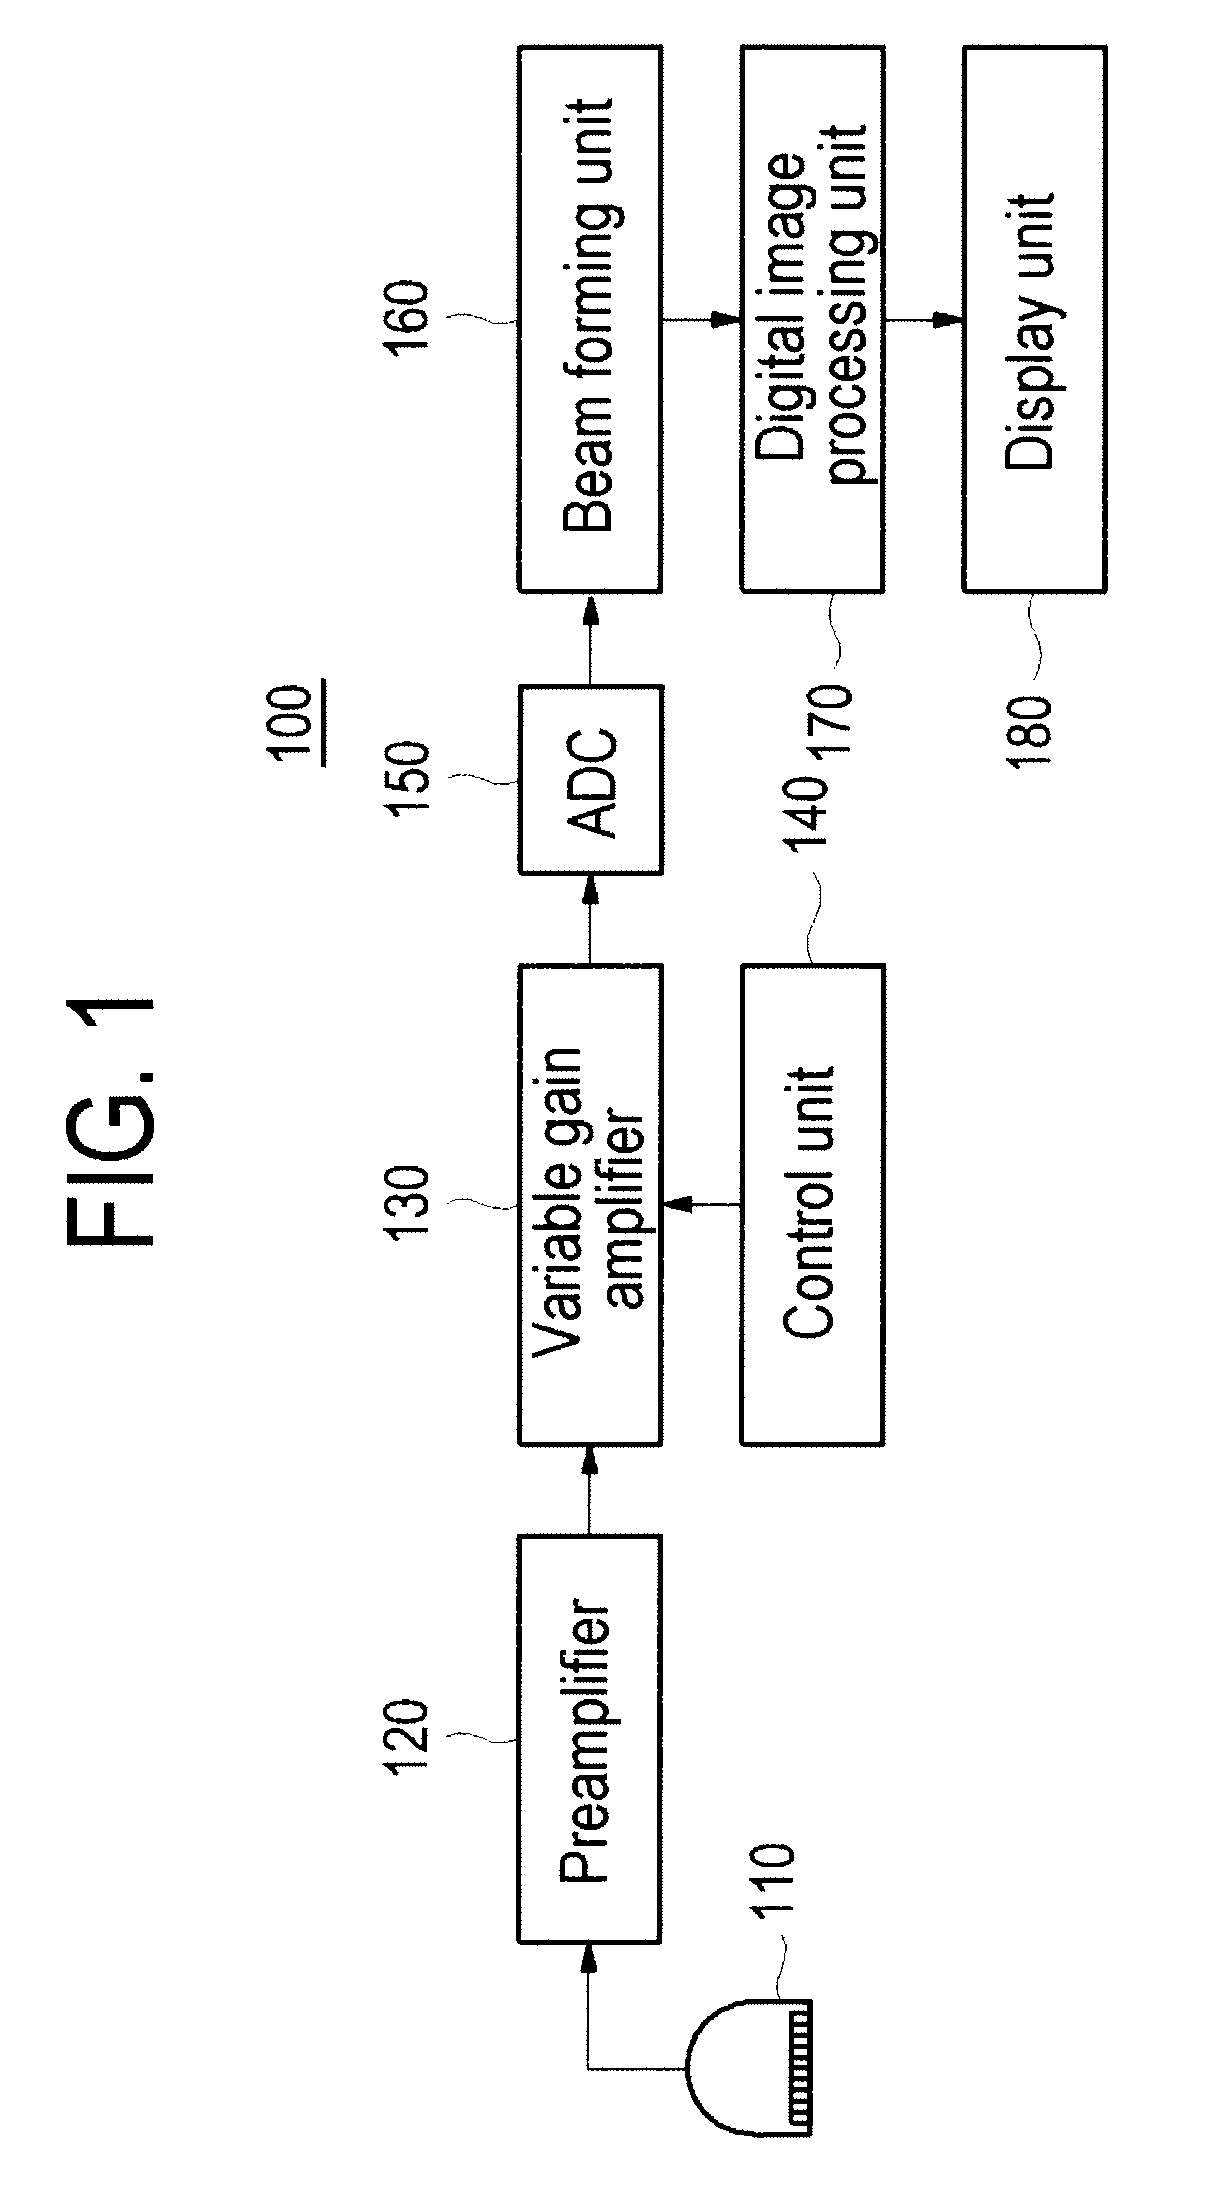 Wideband variable gain amplifier with clipping function